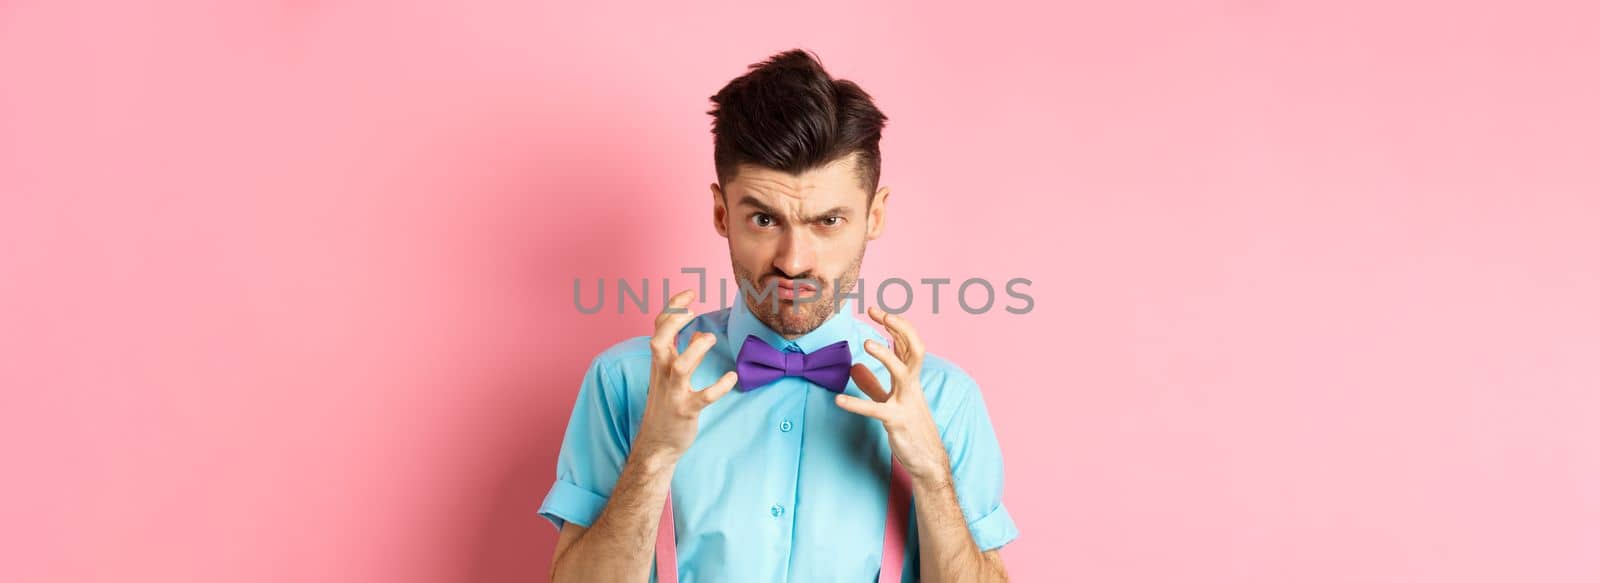 Image of angry guy in bow-tie gonna strangle someone, raising hands up and looking mad or pissed-off, feeling furious, standing on pink background.